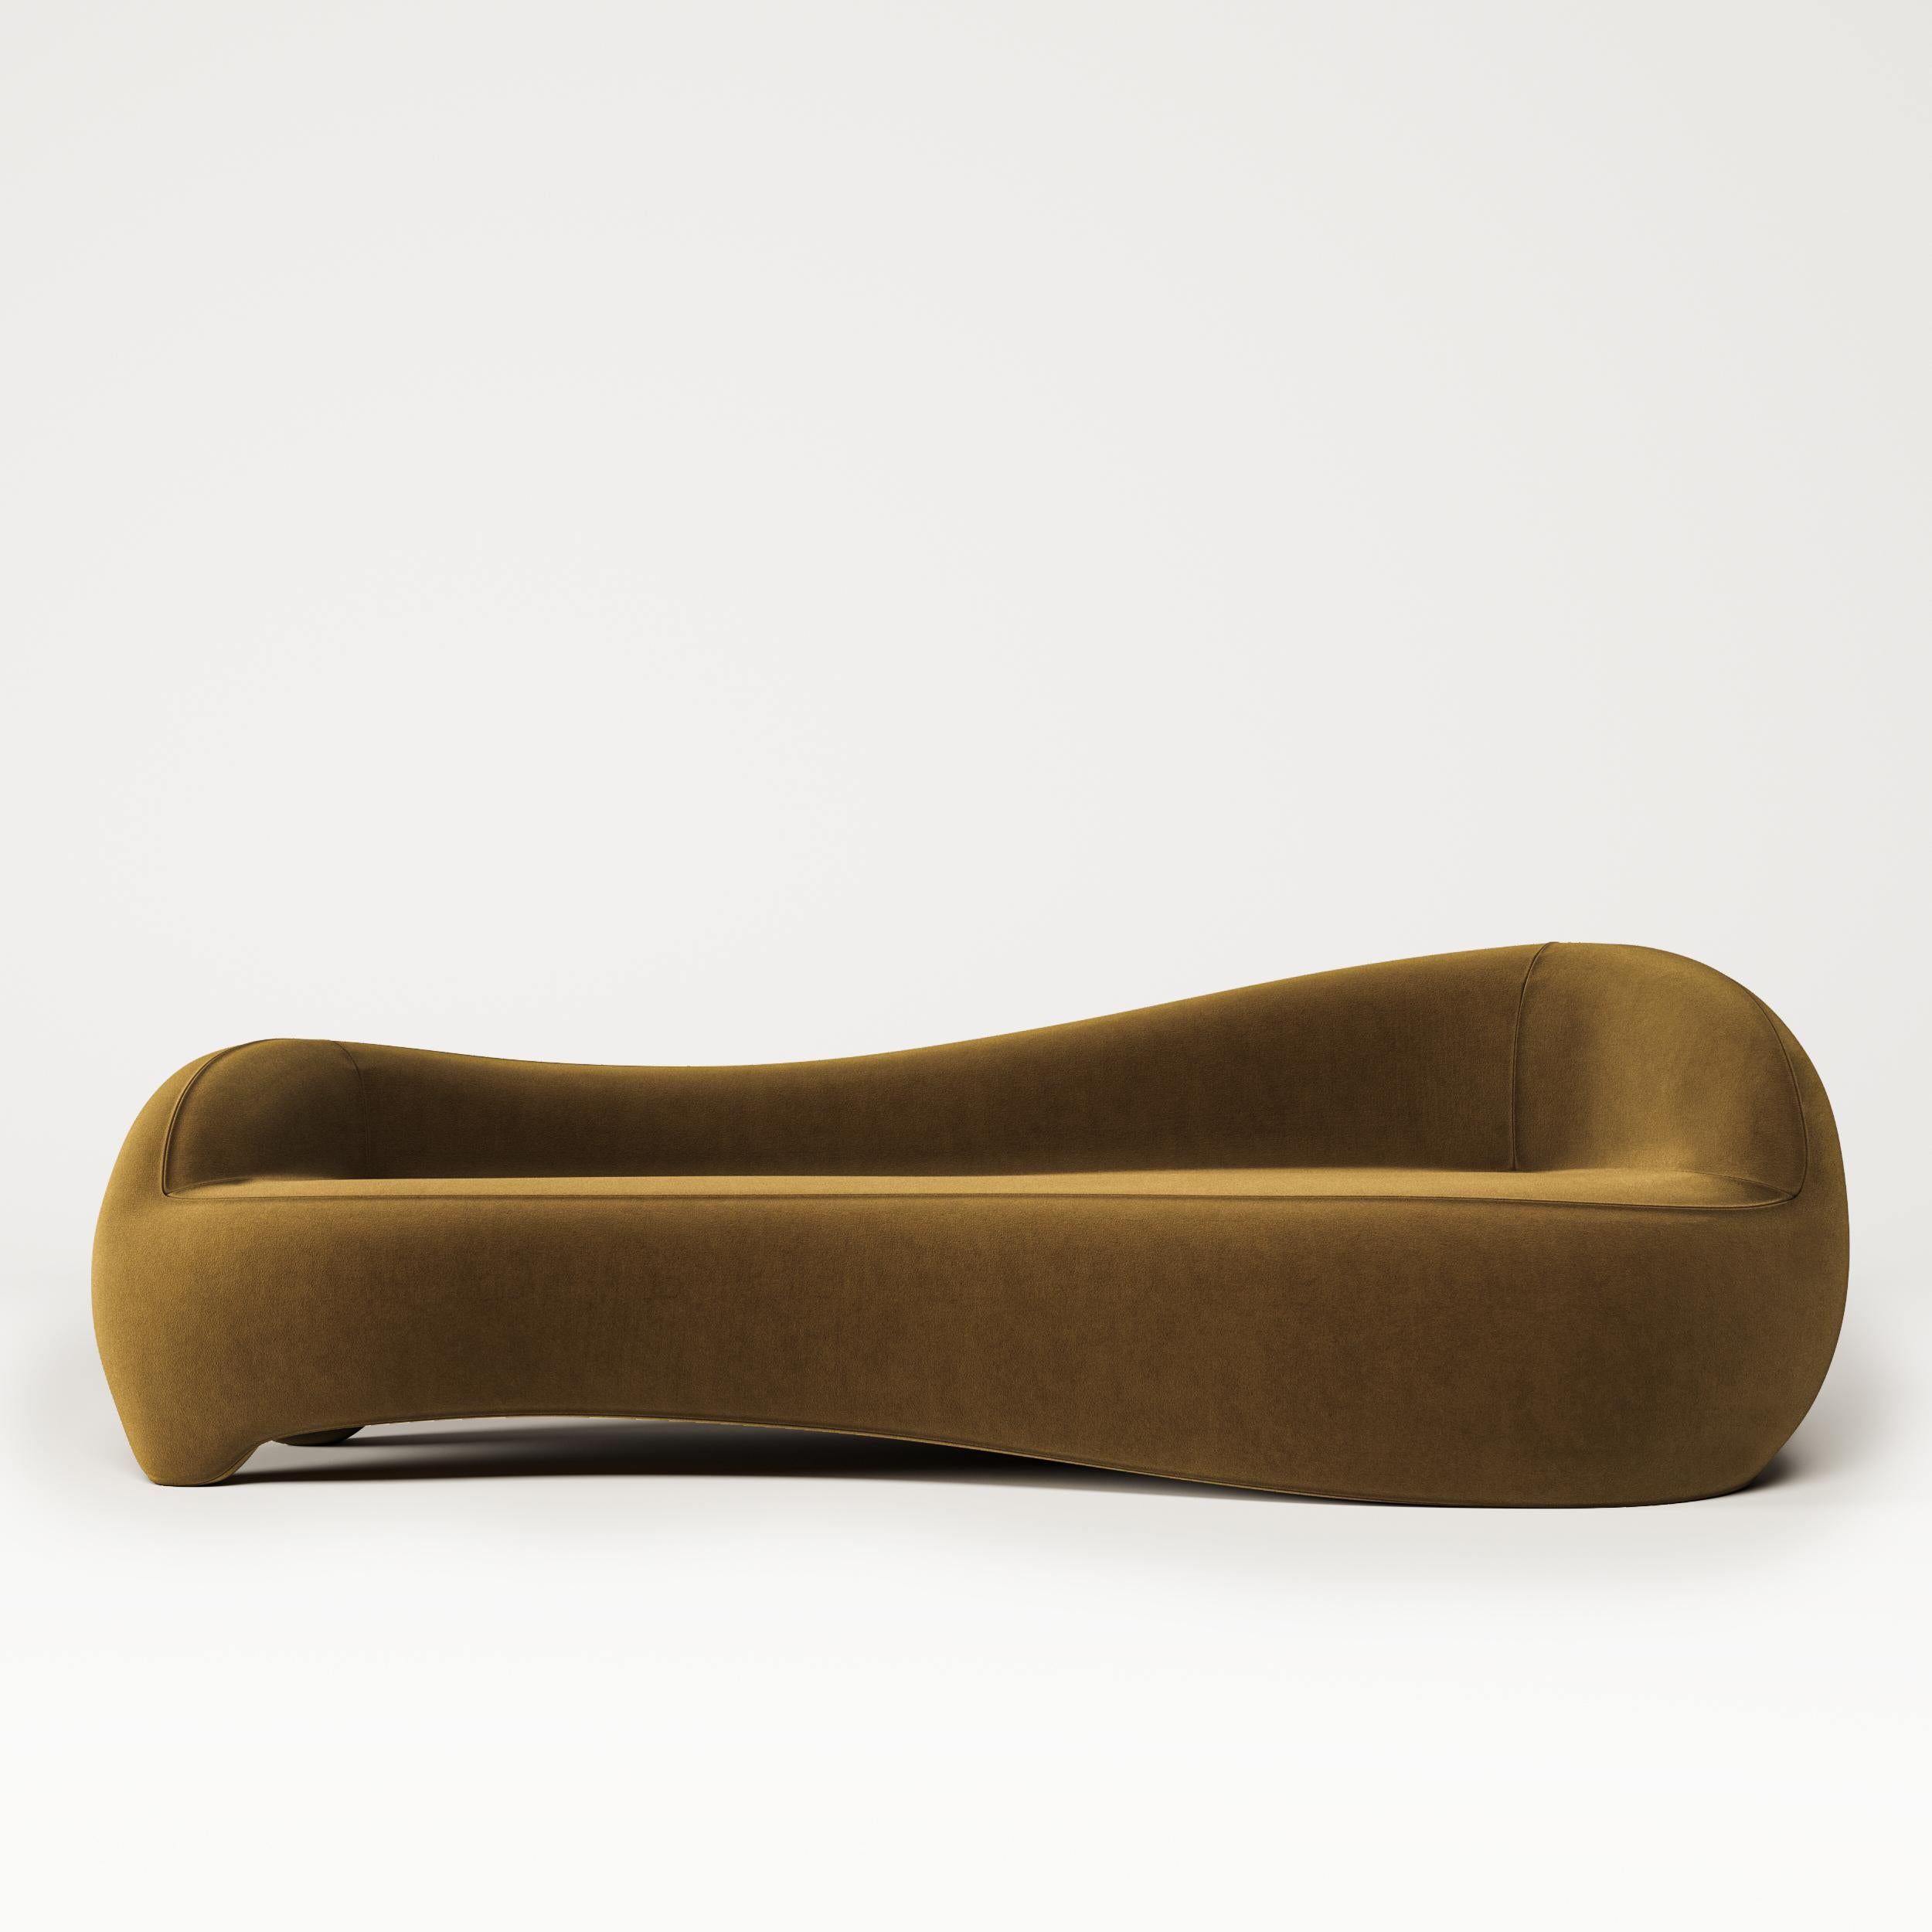 Pal_Up Sofa

Mehmet Orel, who designed the Pal_up sofa, designed as a continuation of the Paloma series, also pays homage to Gaetono Pesce with this design.

While designing the Up series, Pesce made references to the place and bondage of women